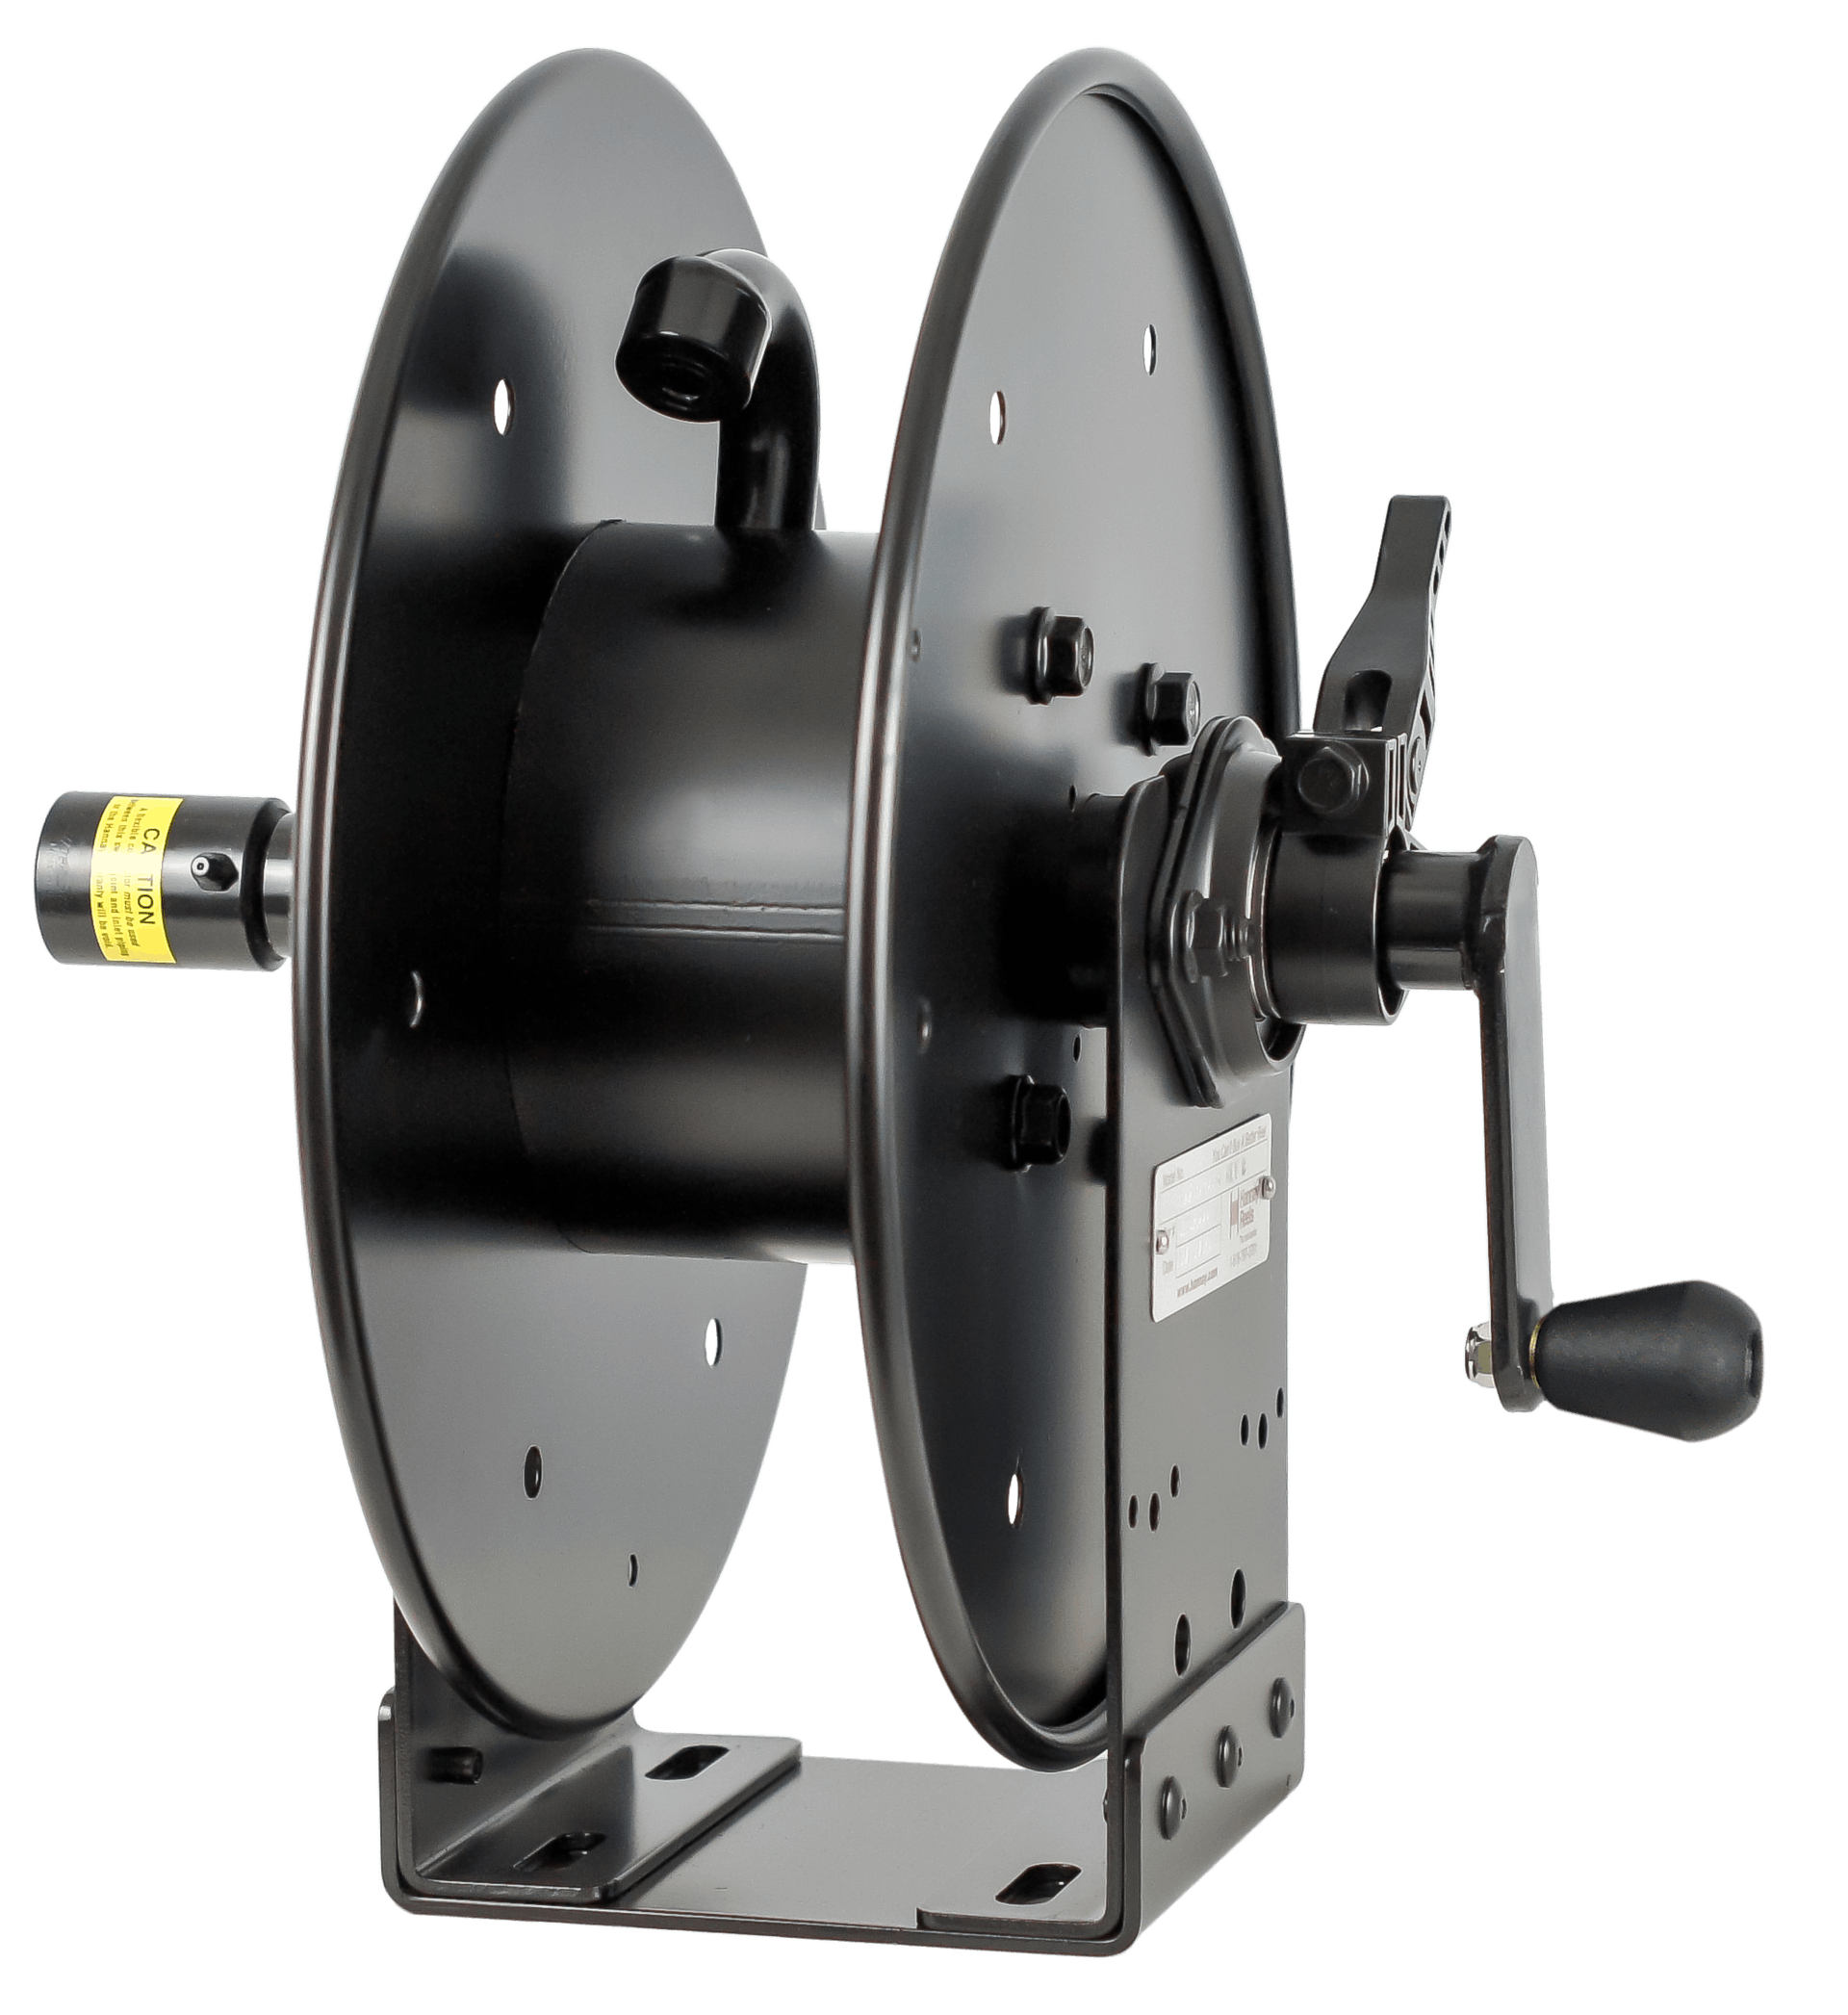 Hannay Reels Launches MS-1000 Spray Series Reel From: Hannay Reels